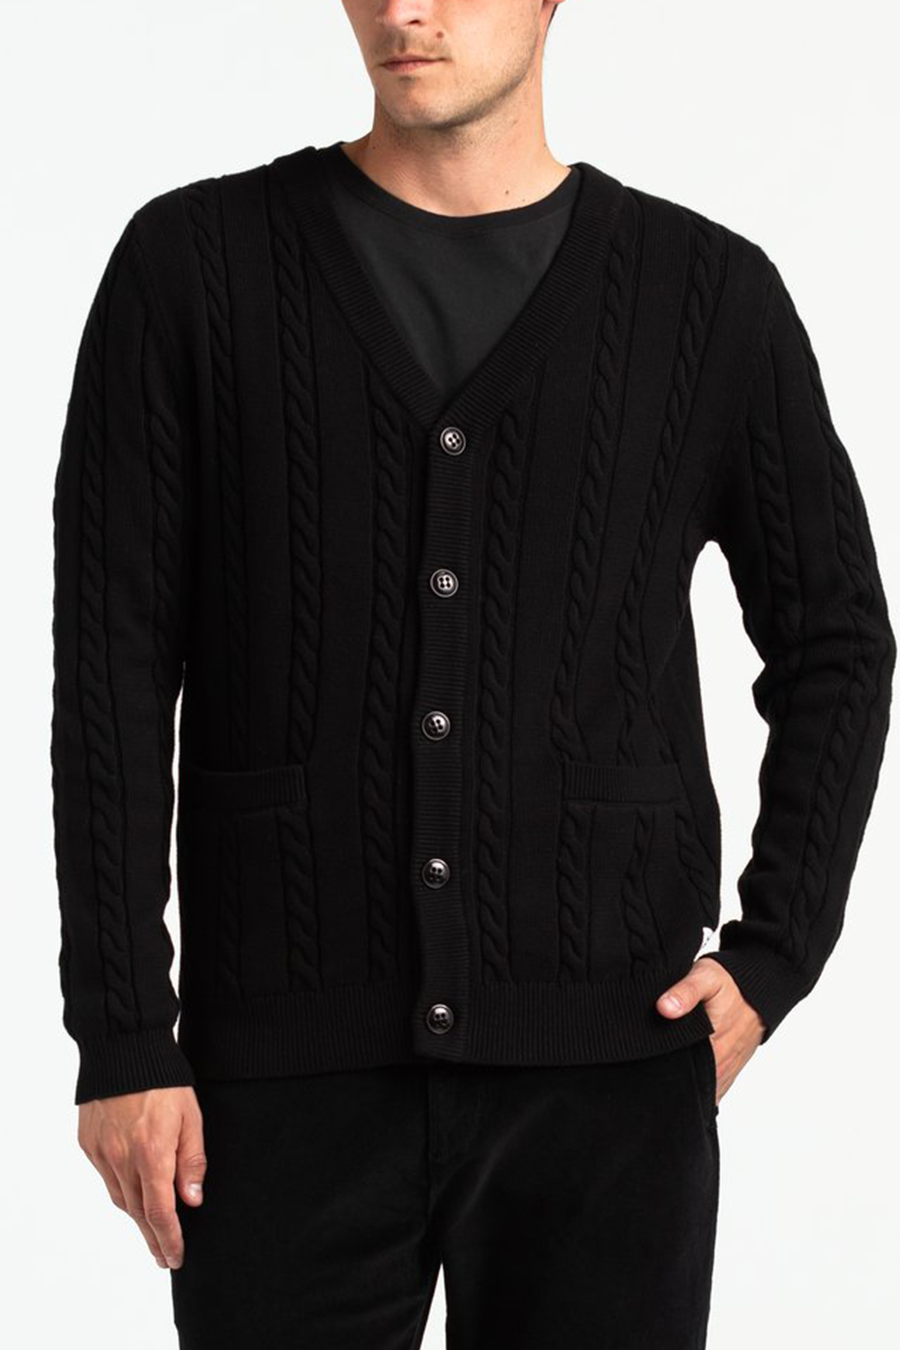 Off The Grid Knit Cardigan | Black - Main Image Number 2 of 4